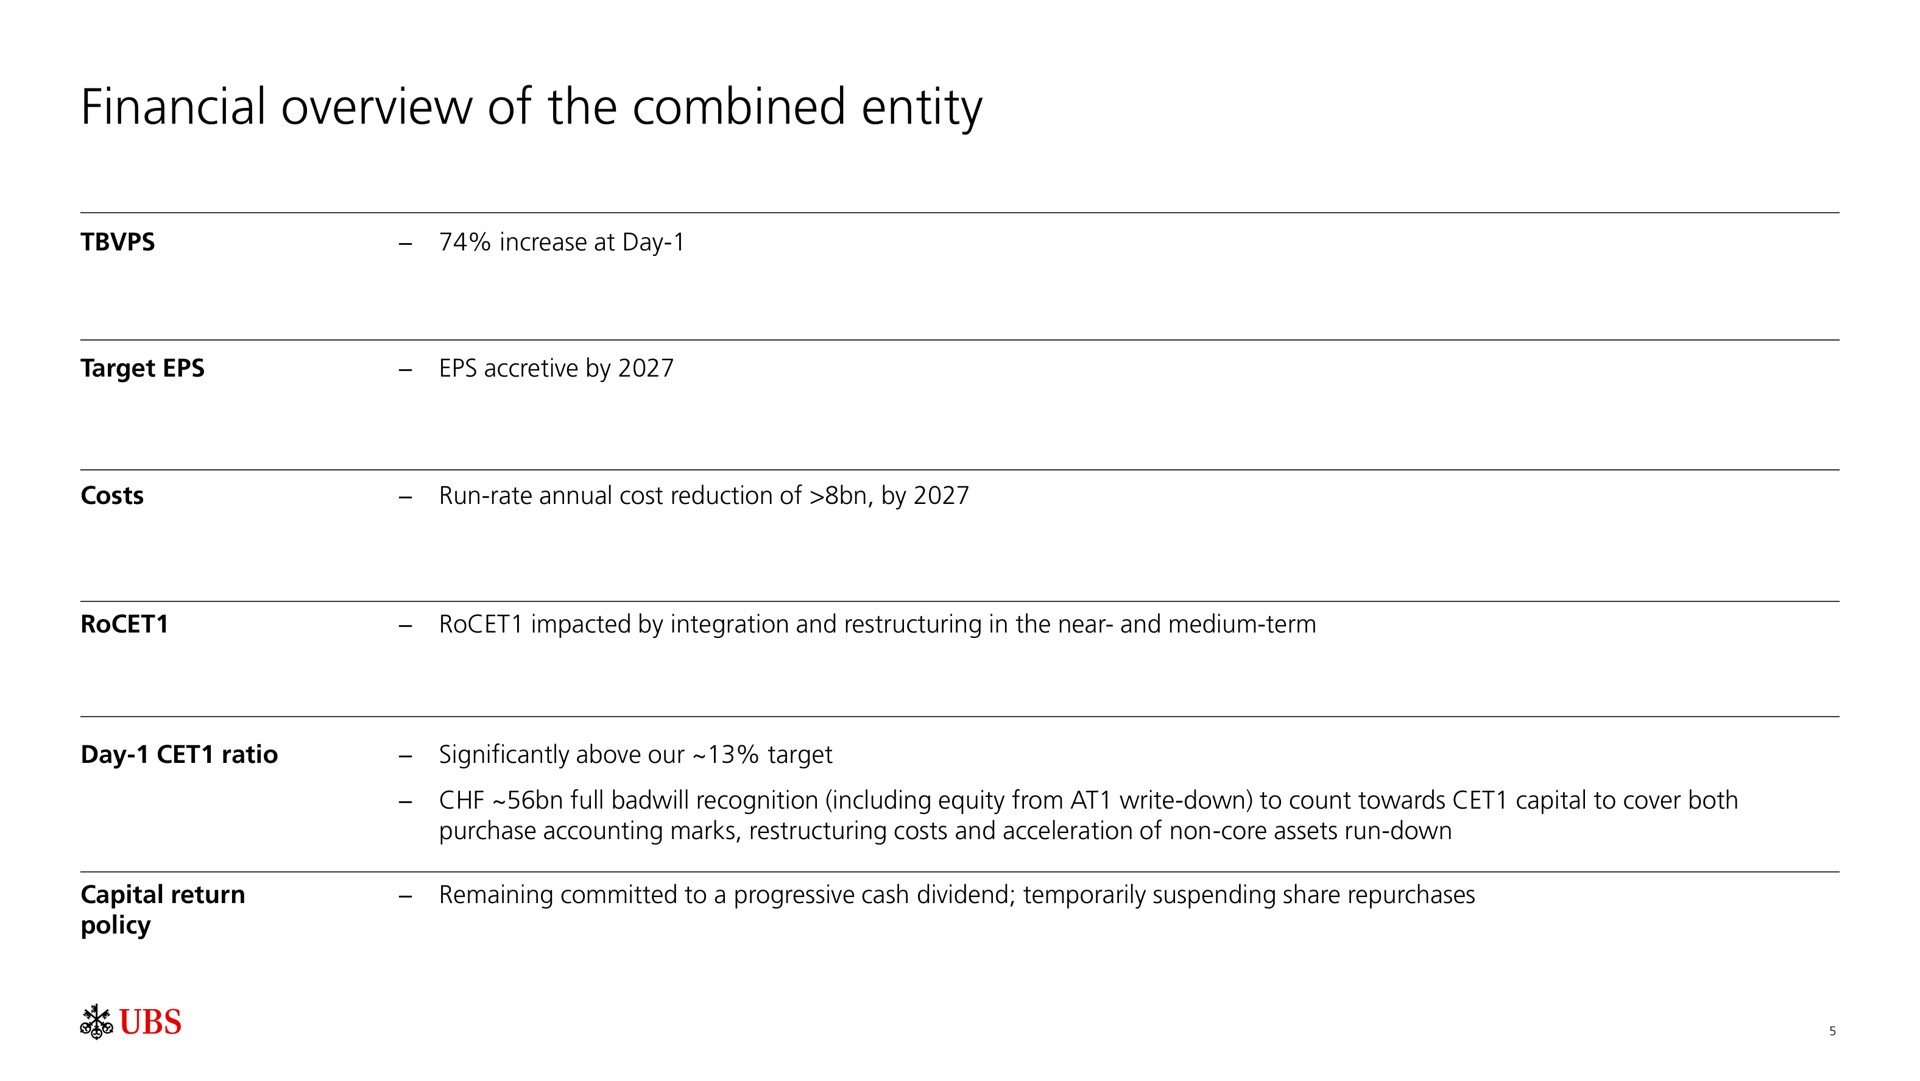 financial overview of the combined entity | UBS